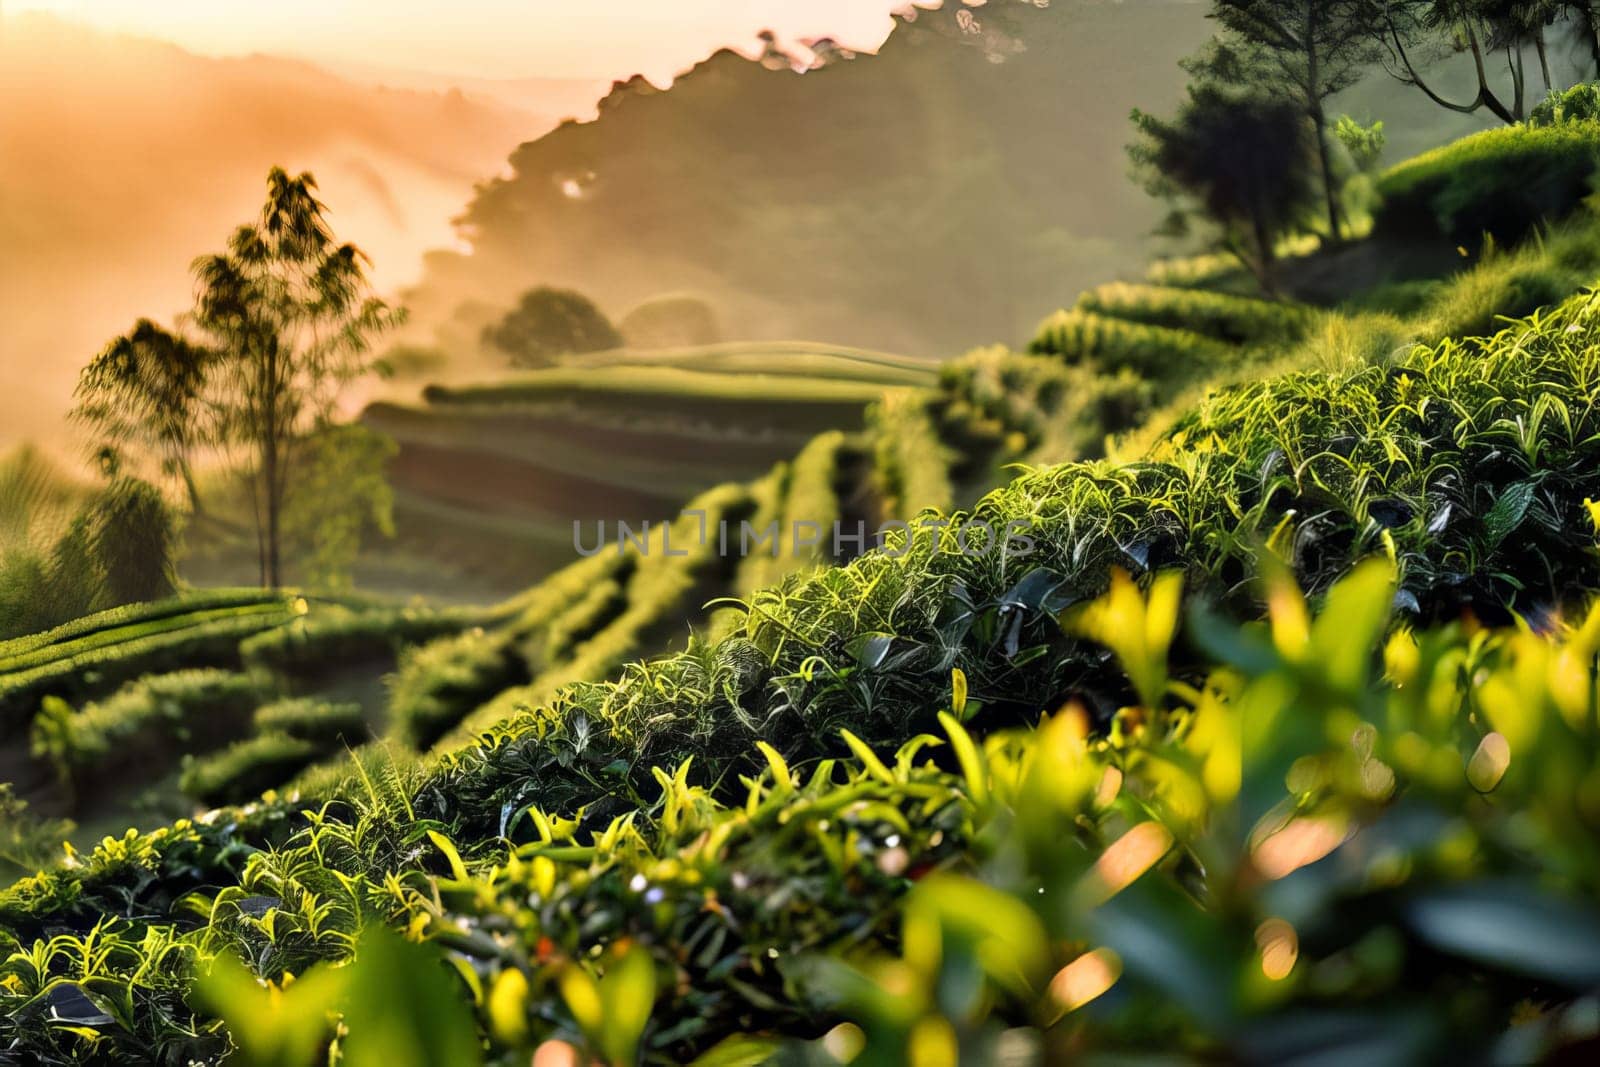 Experience the essence of tradition with tea-picking in stunning green terraces at sunrise, a timeless display of cultural richness